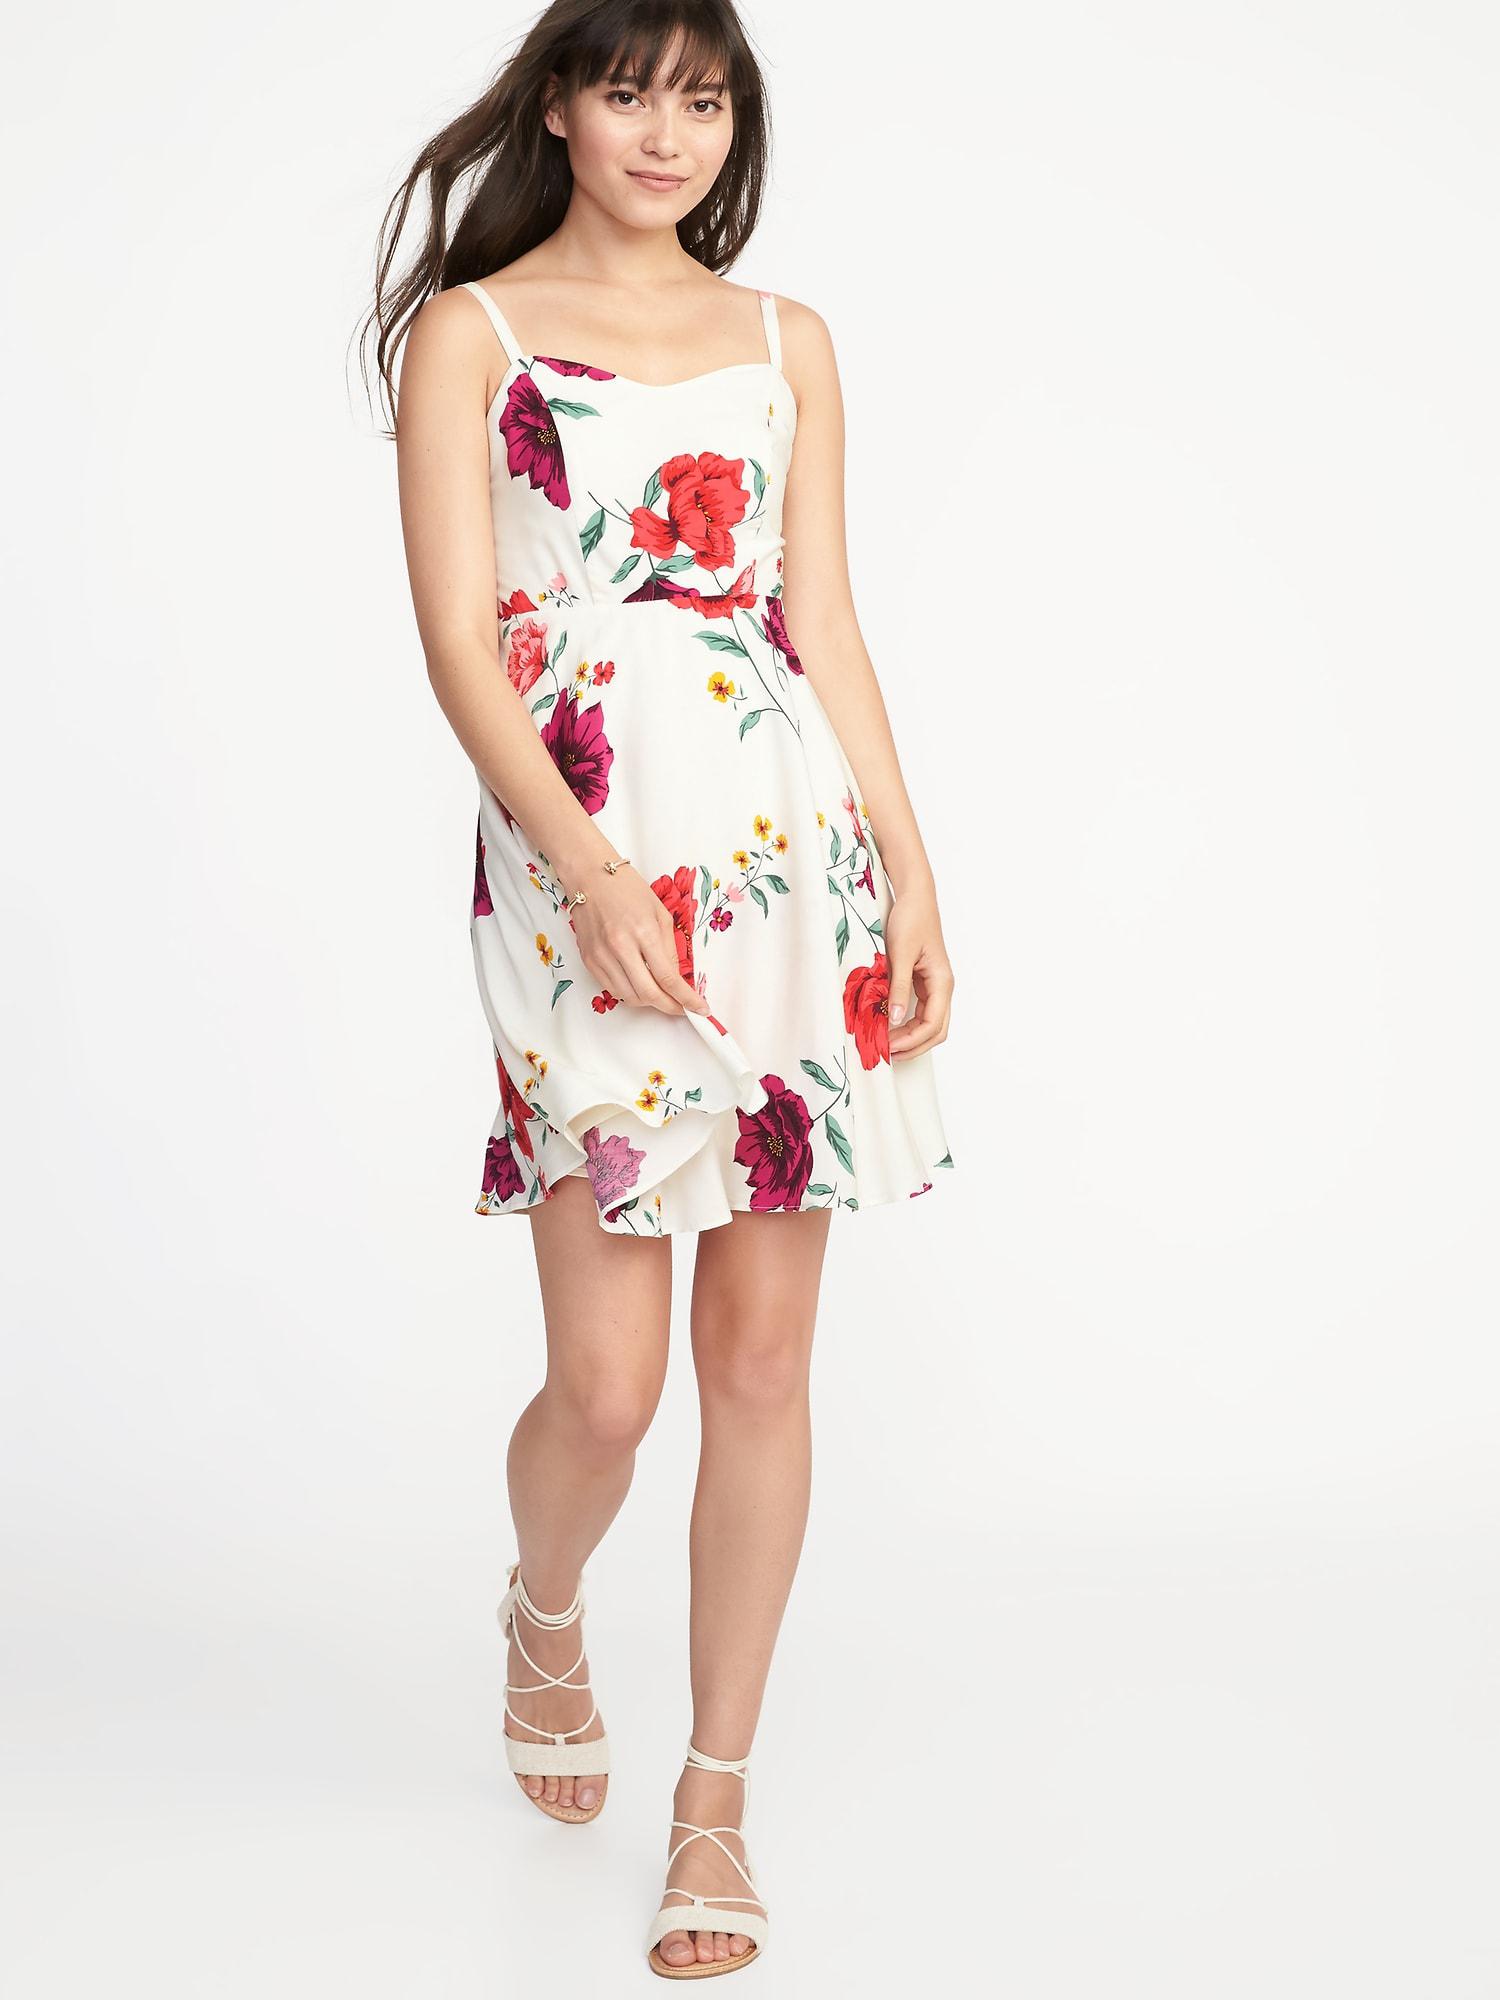 old navy white floral dress